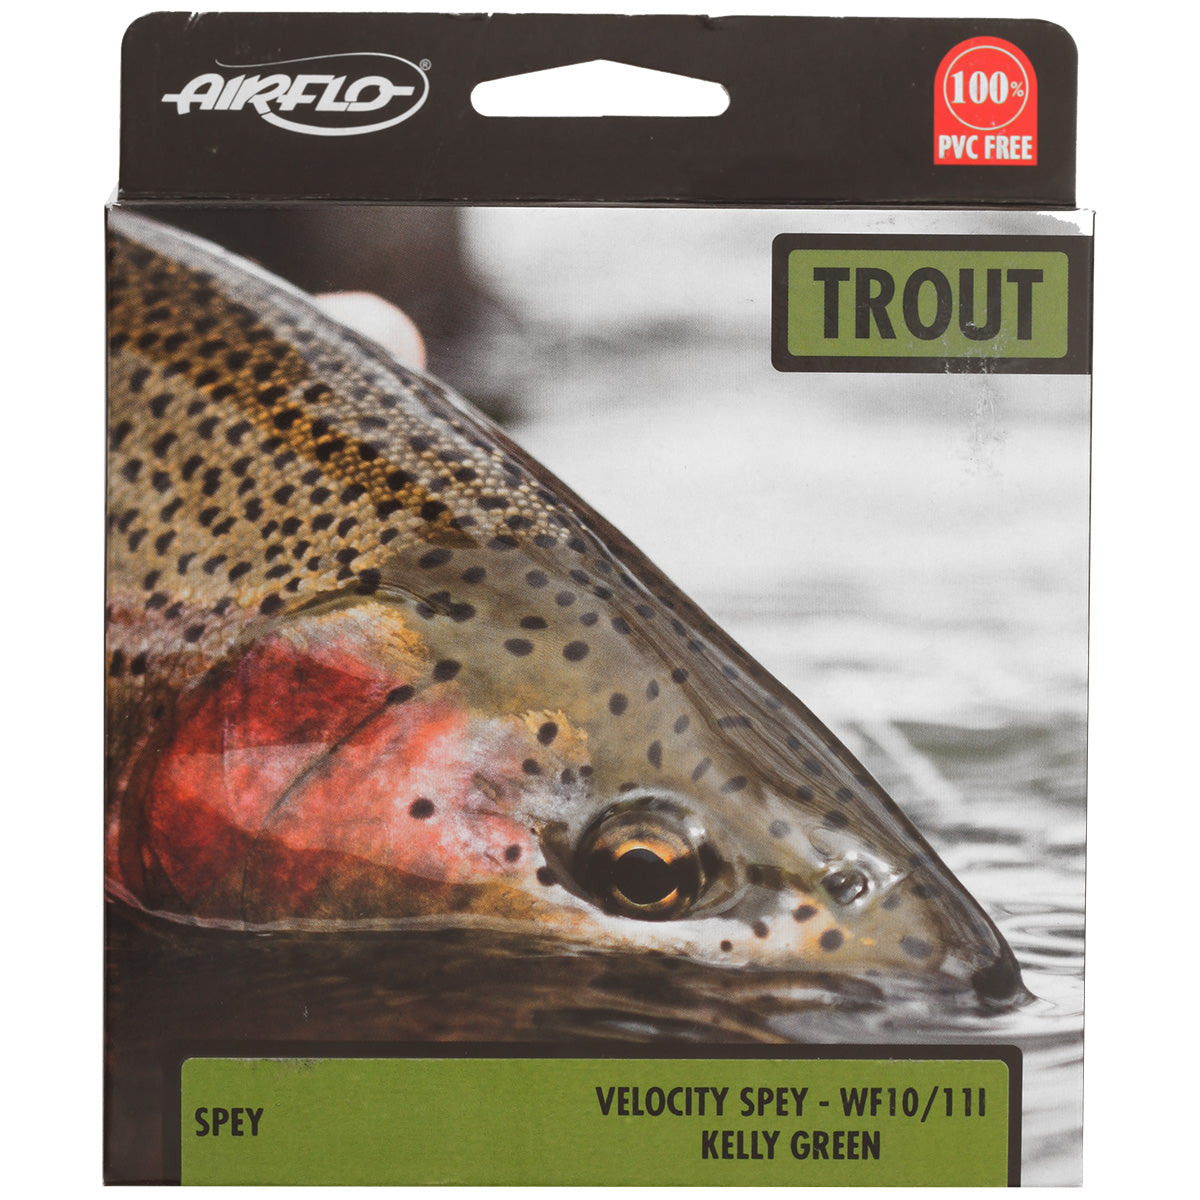 AIRFLO VELOCITY TROUT FLY LINES